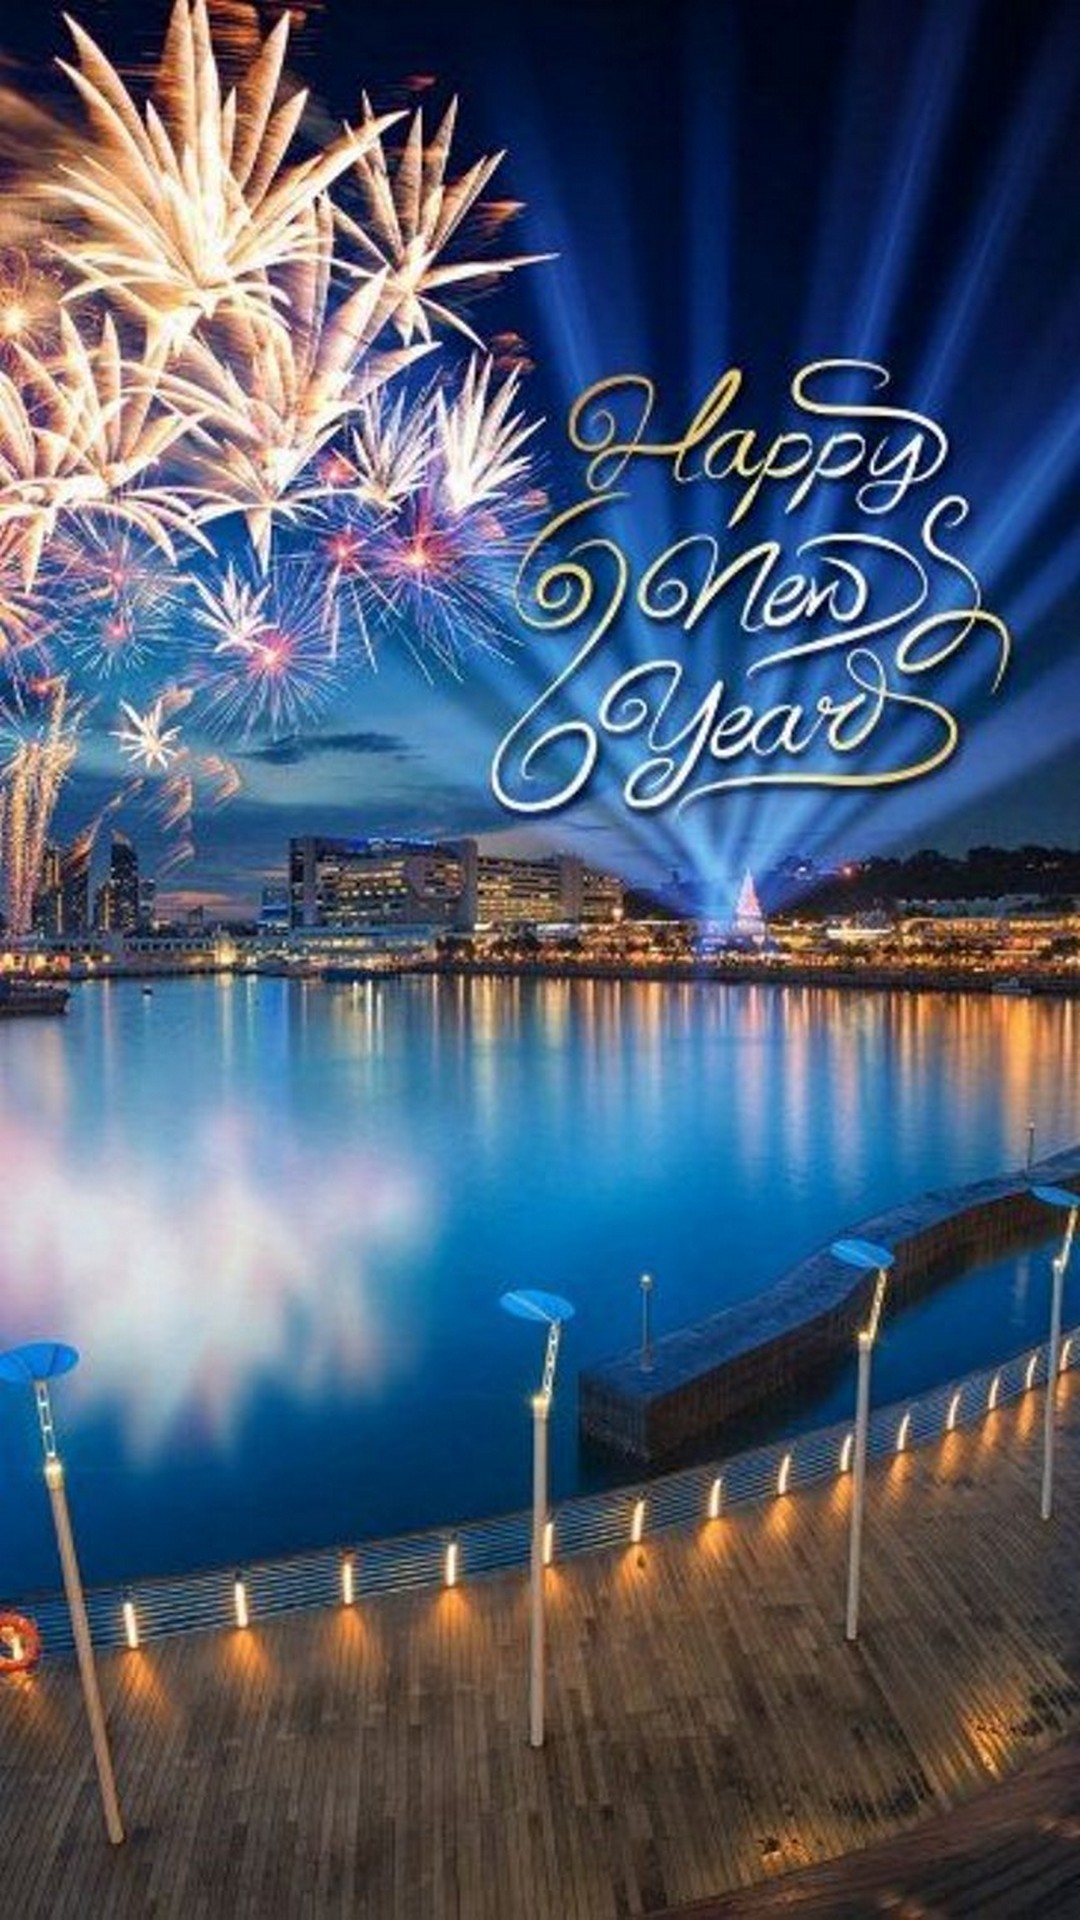 iPhone Wallpaper Happy New Year 2018 resolution 1080x1920